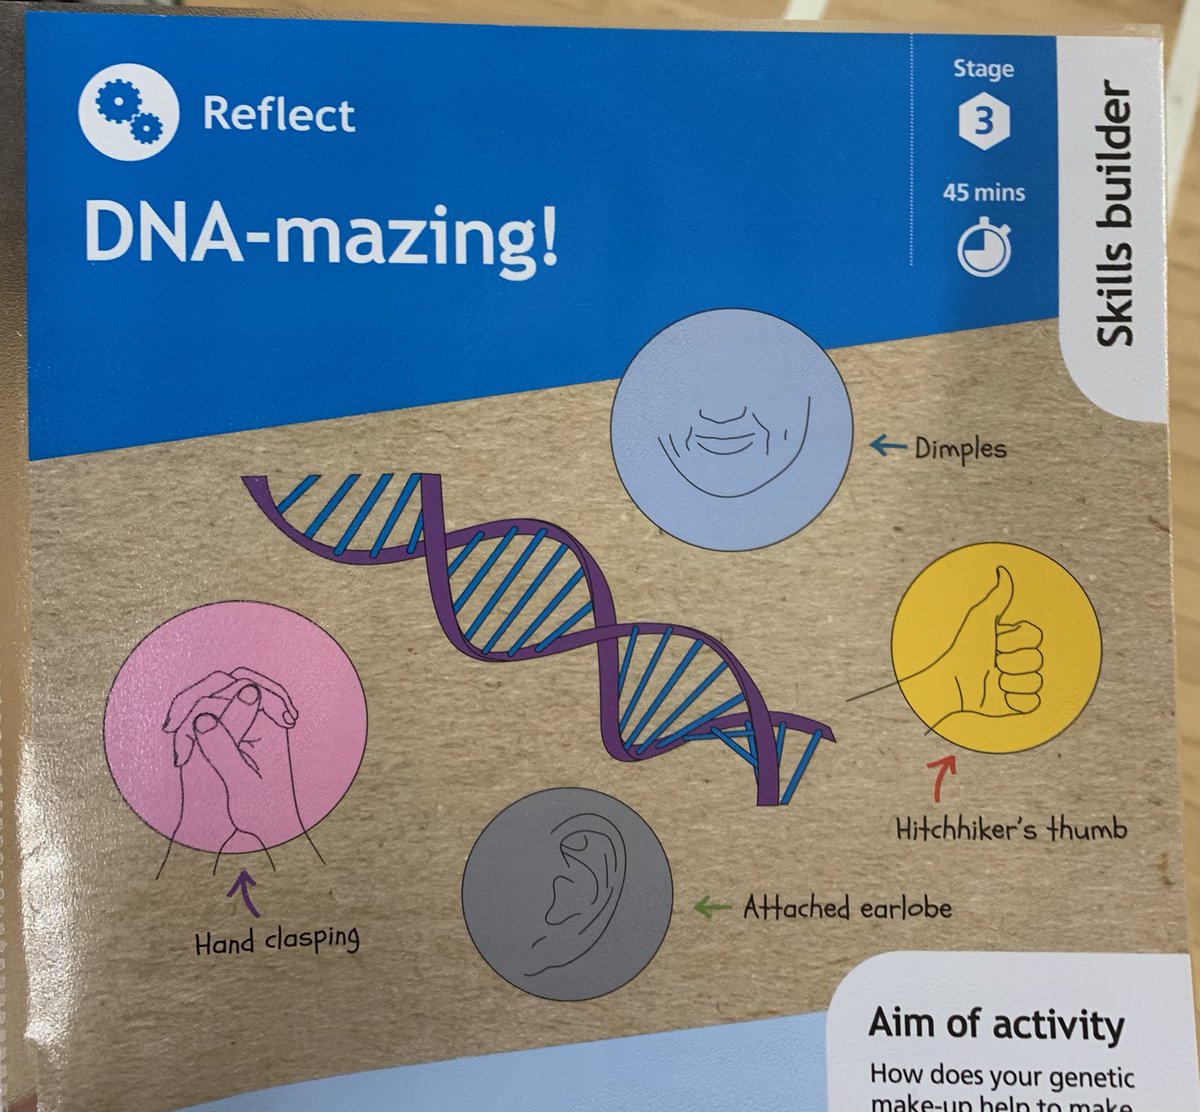  We did 3 activities with Helen last Monday, using a mix of UMAs and SBs, and Harry Potter characters as examples  1. Learnt about our DNA codes  2. Reflected on our reflections 3. Learnt about our different traits and characteristics 